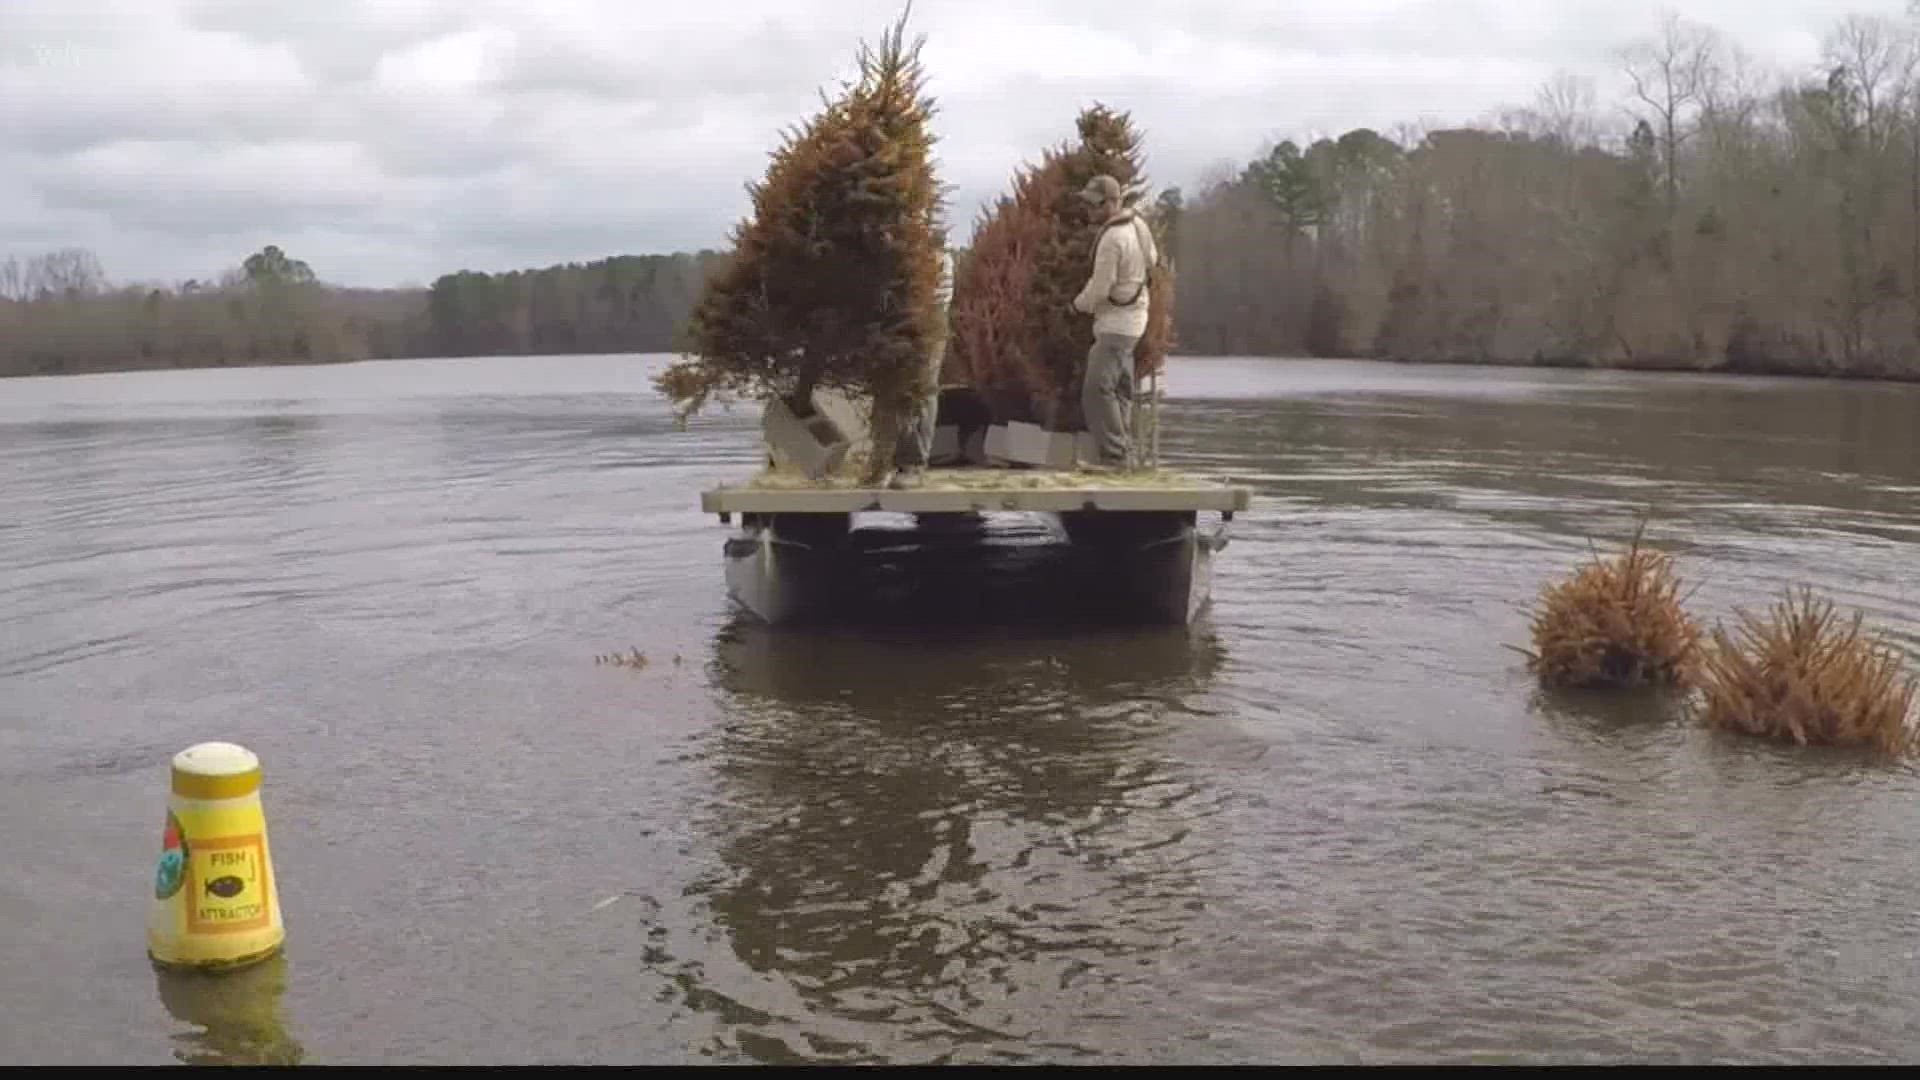 In an effort to restore the fish habitat in Lake Murray, SCDNR is dropping old Christmas trees in the lake to provide fish habitats.